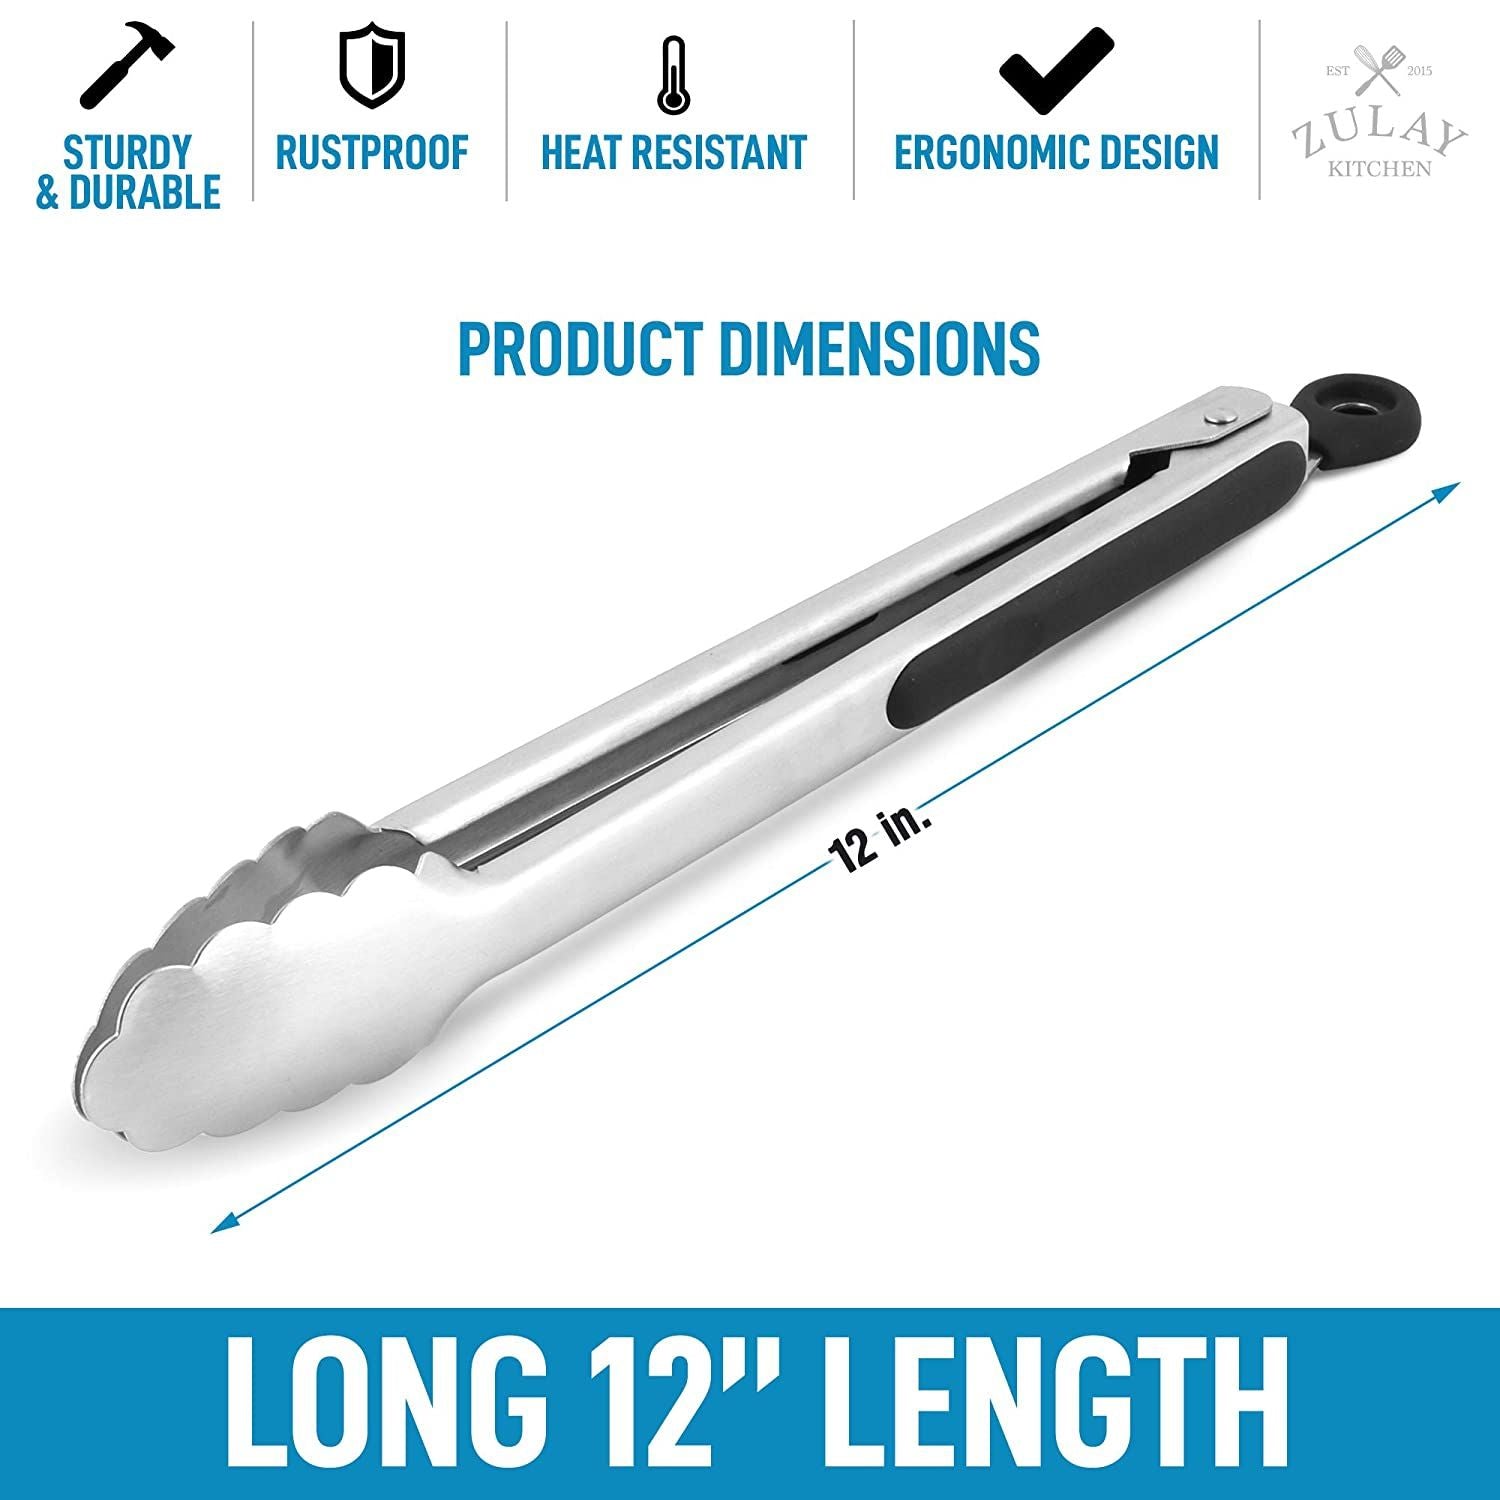 New All-Clad Precision Stainless-Steel Locking Tongs 12”